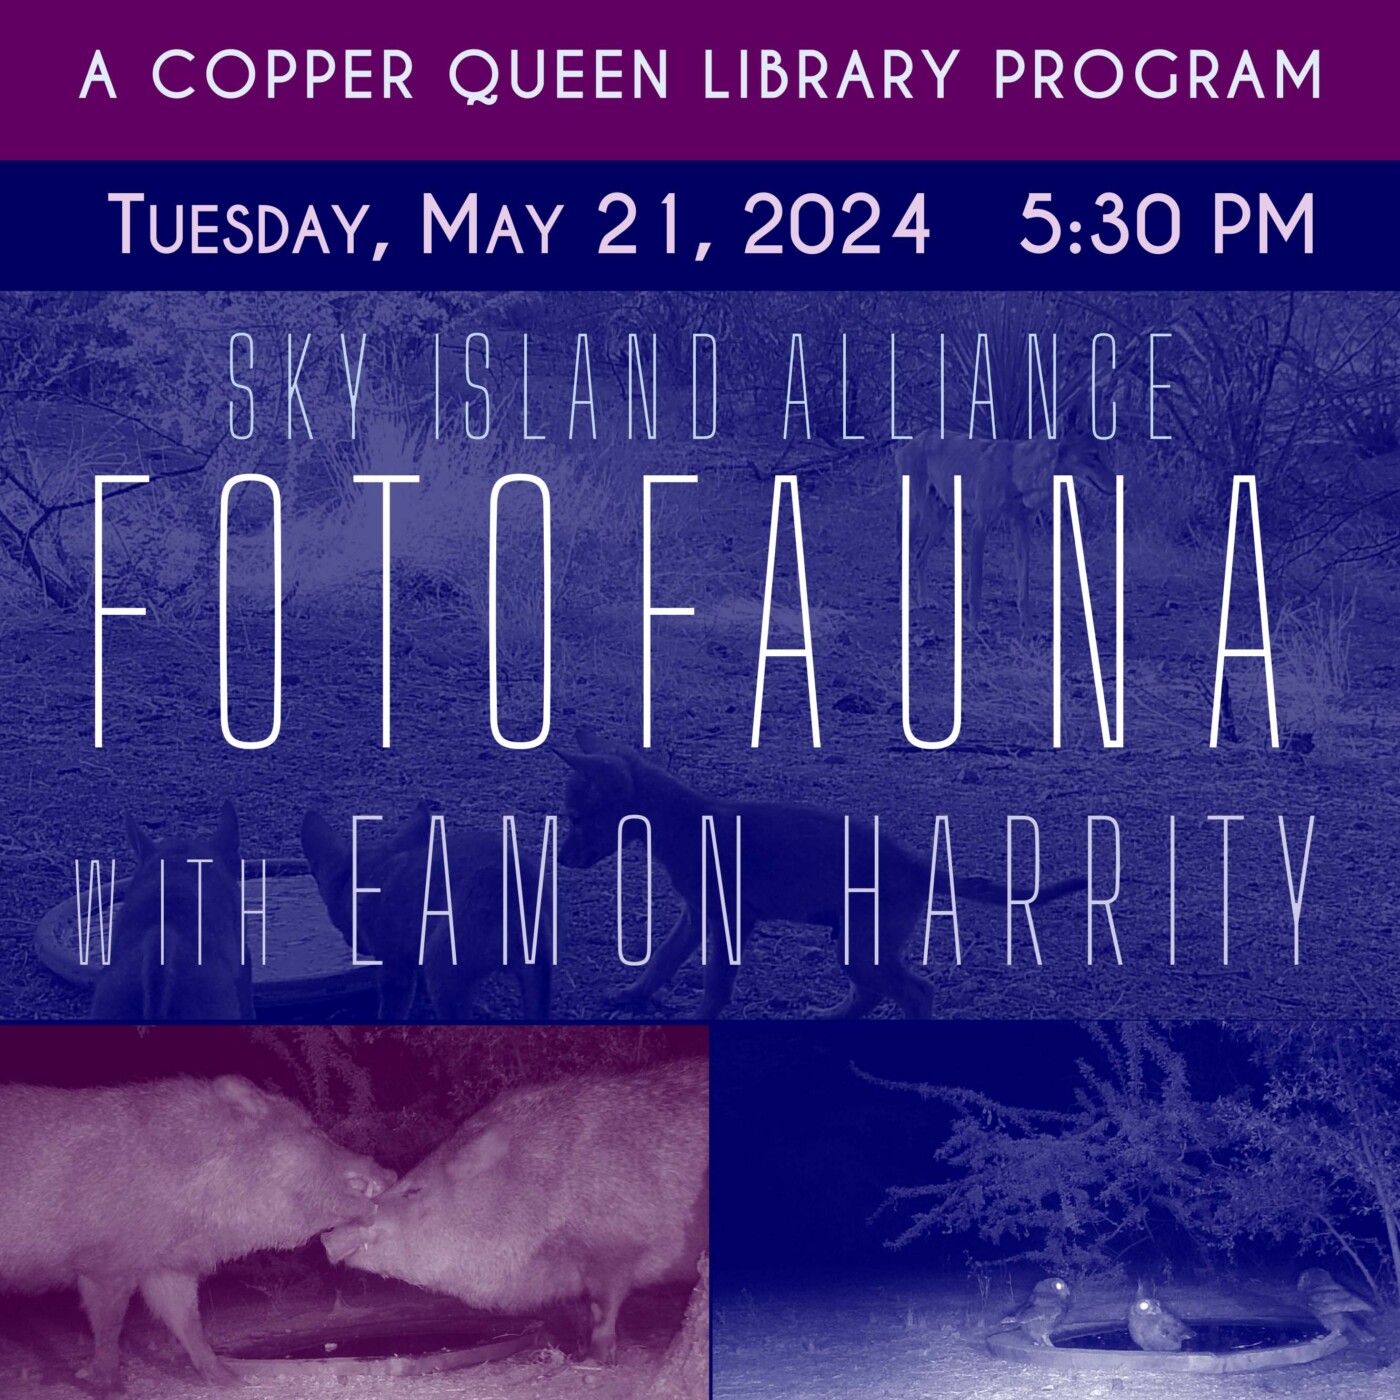 Copper Queen Library kickoff event for FotoFauna